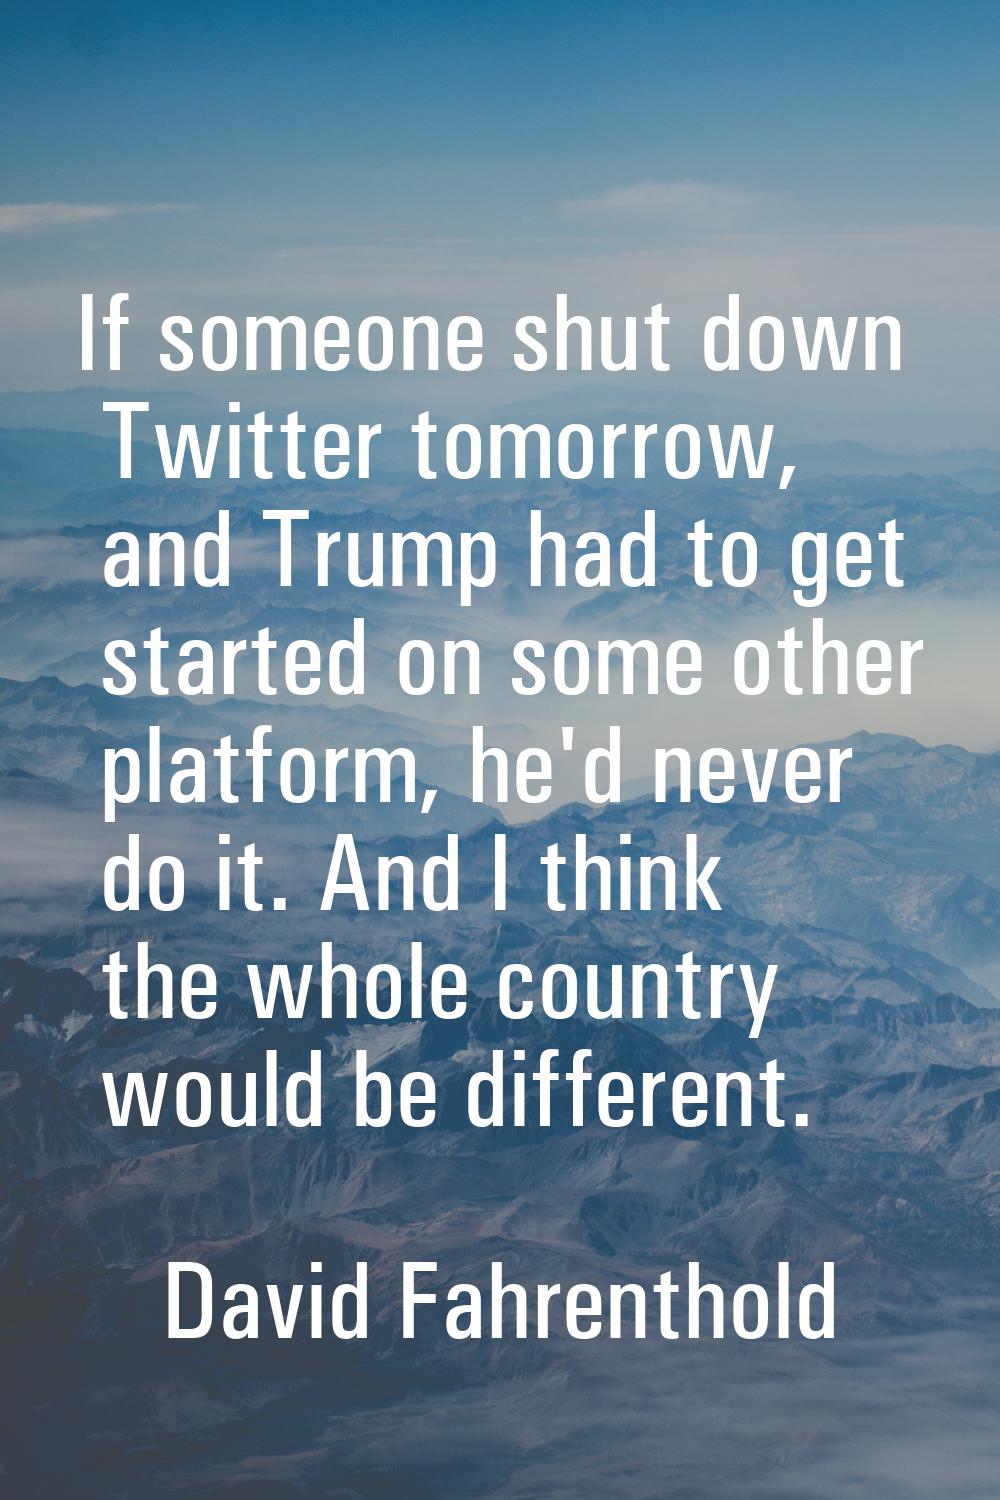 If someone shut down Twitter tomorrow, and Trump had to get started on some other platform, he'd ne